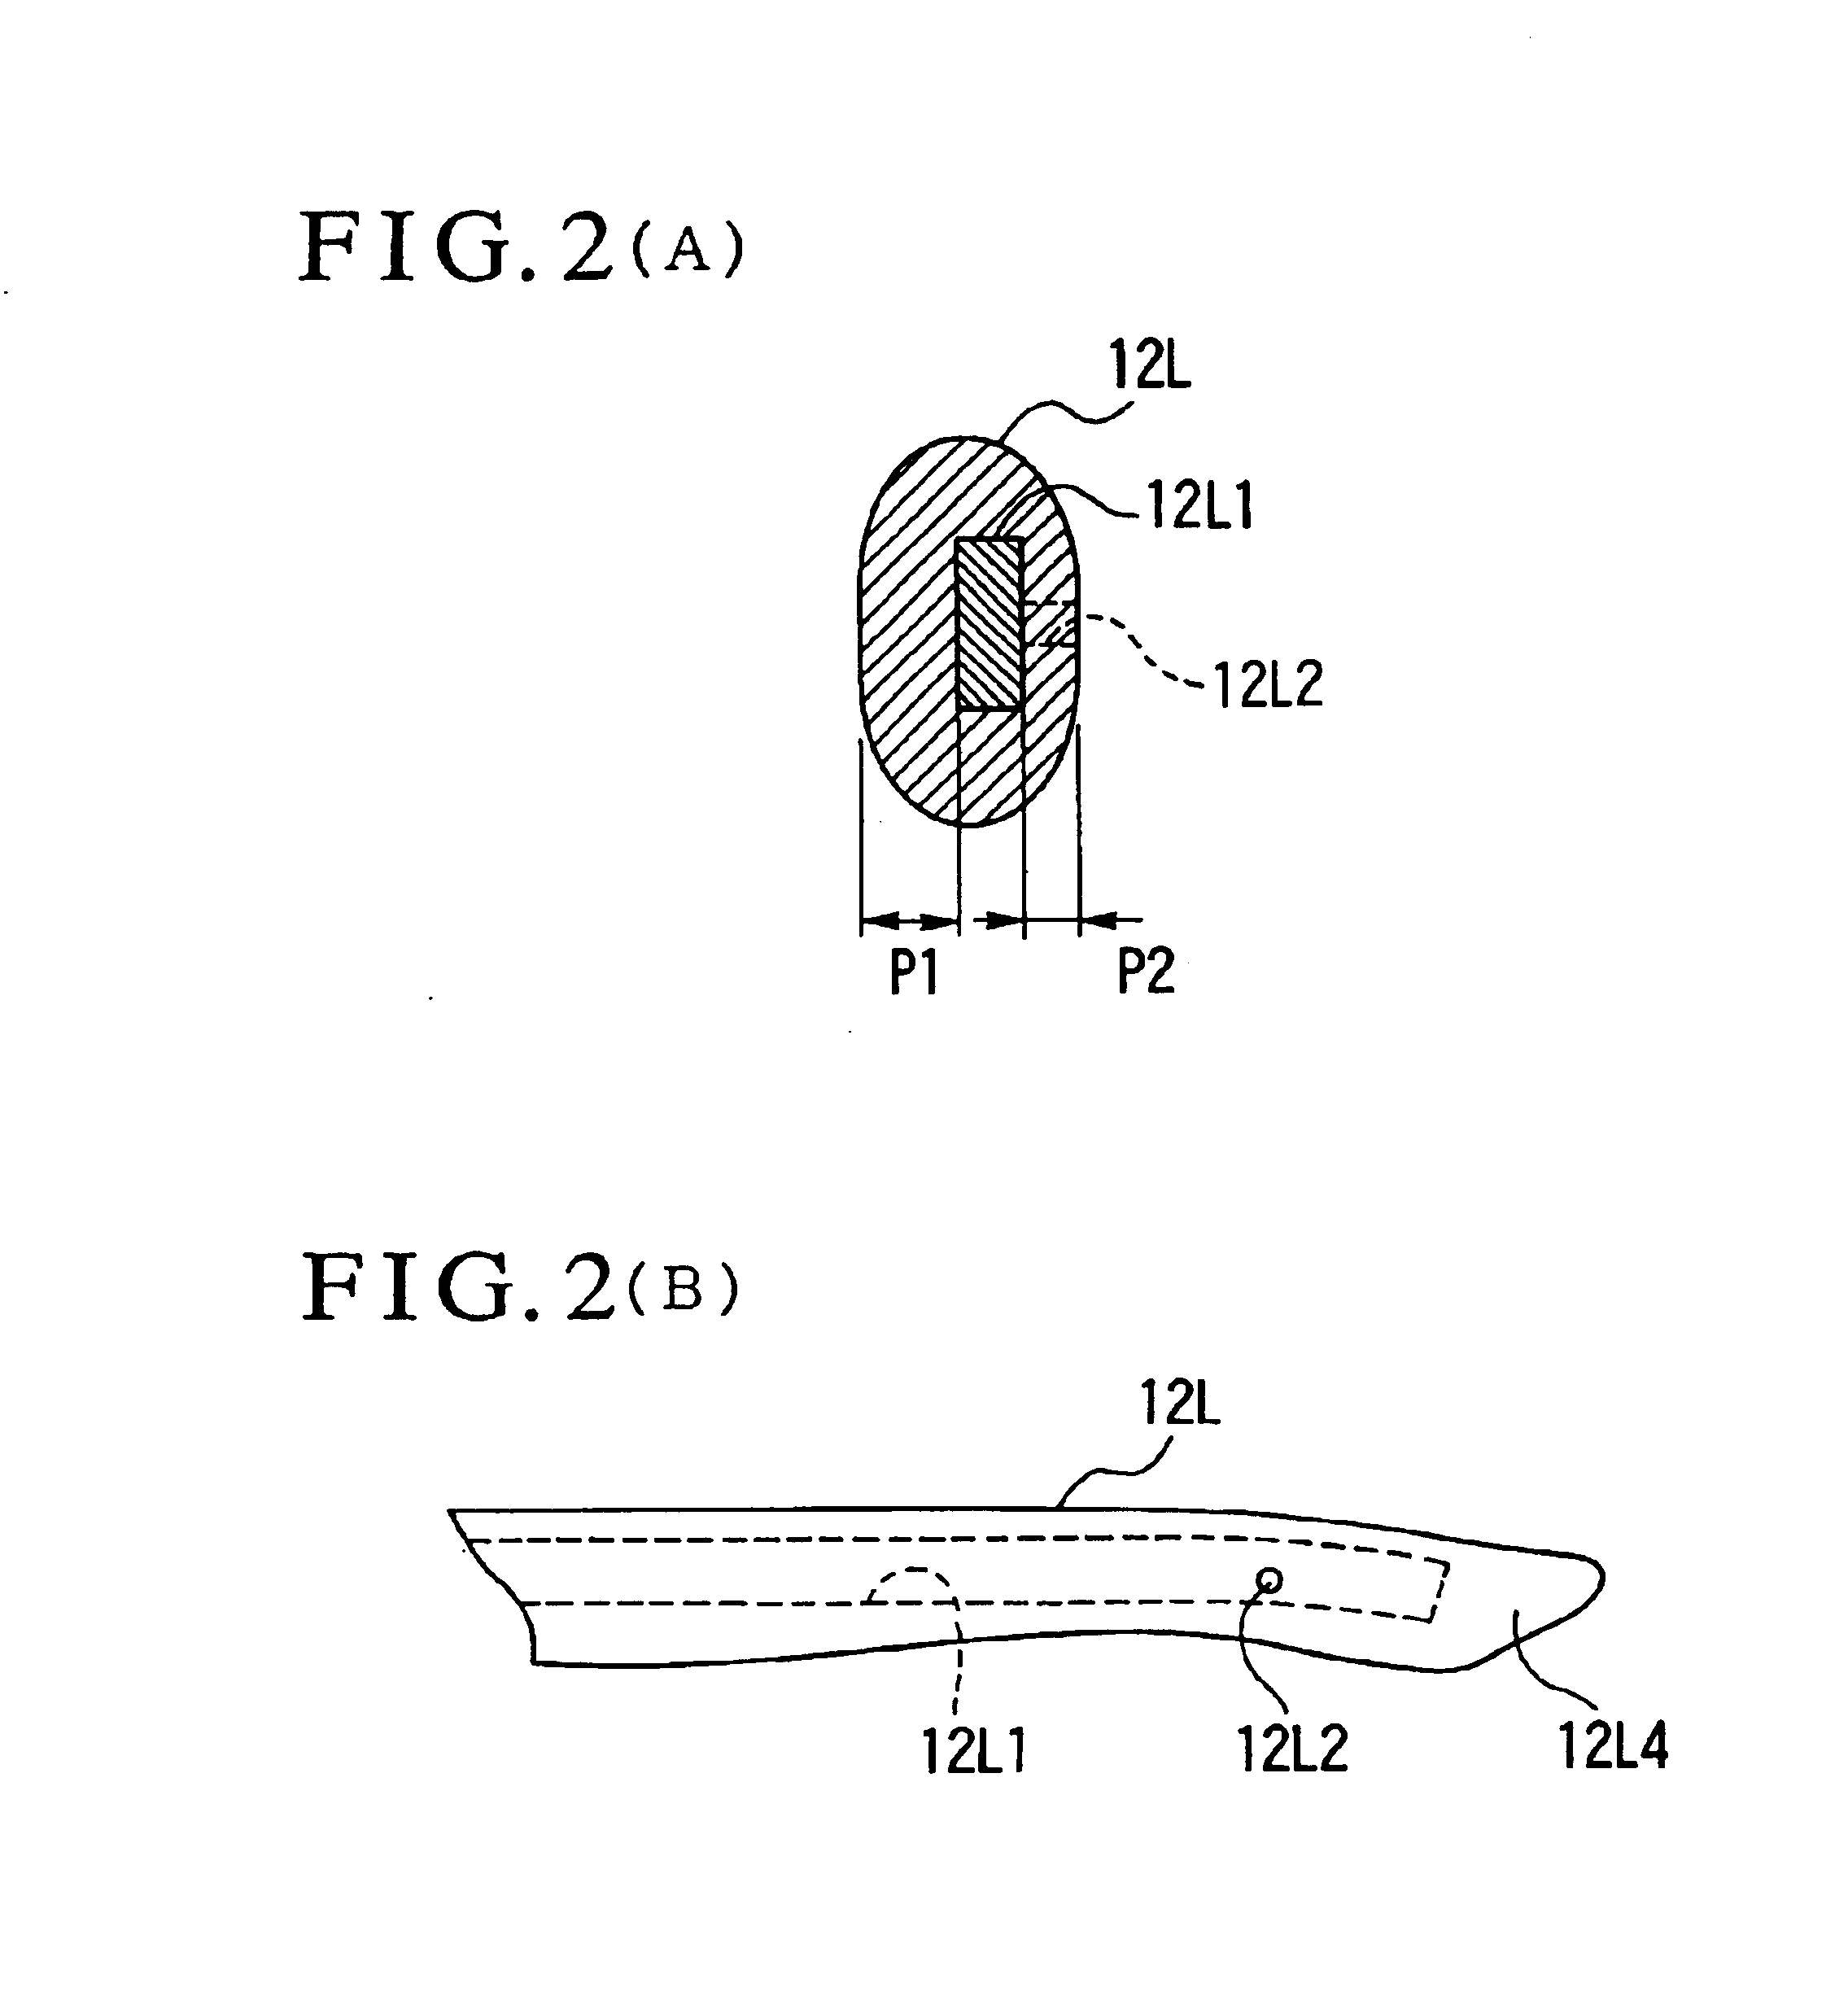 Head-mounted displayed apparatus